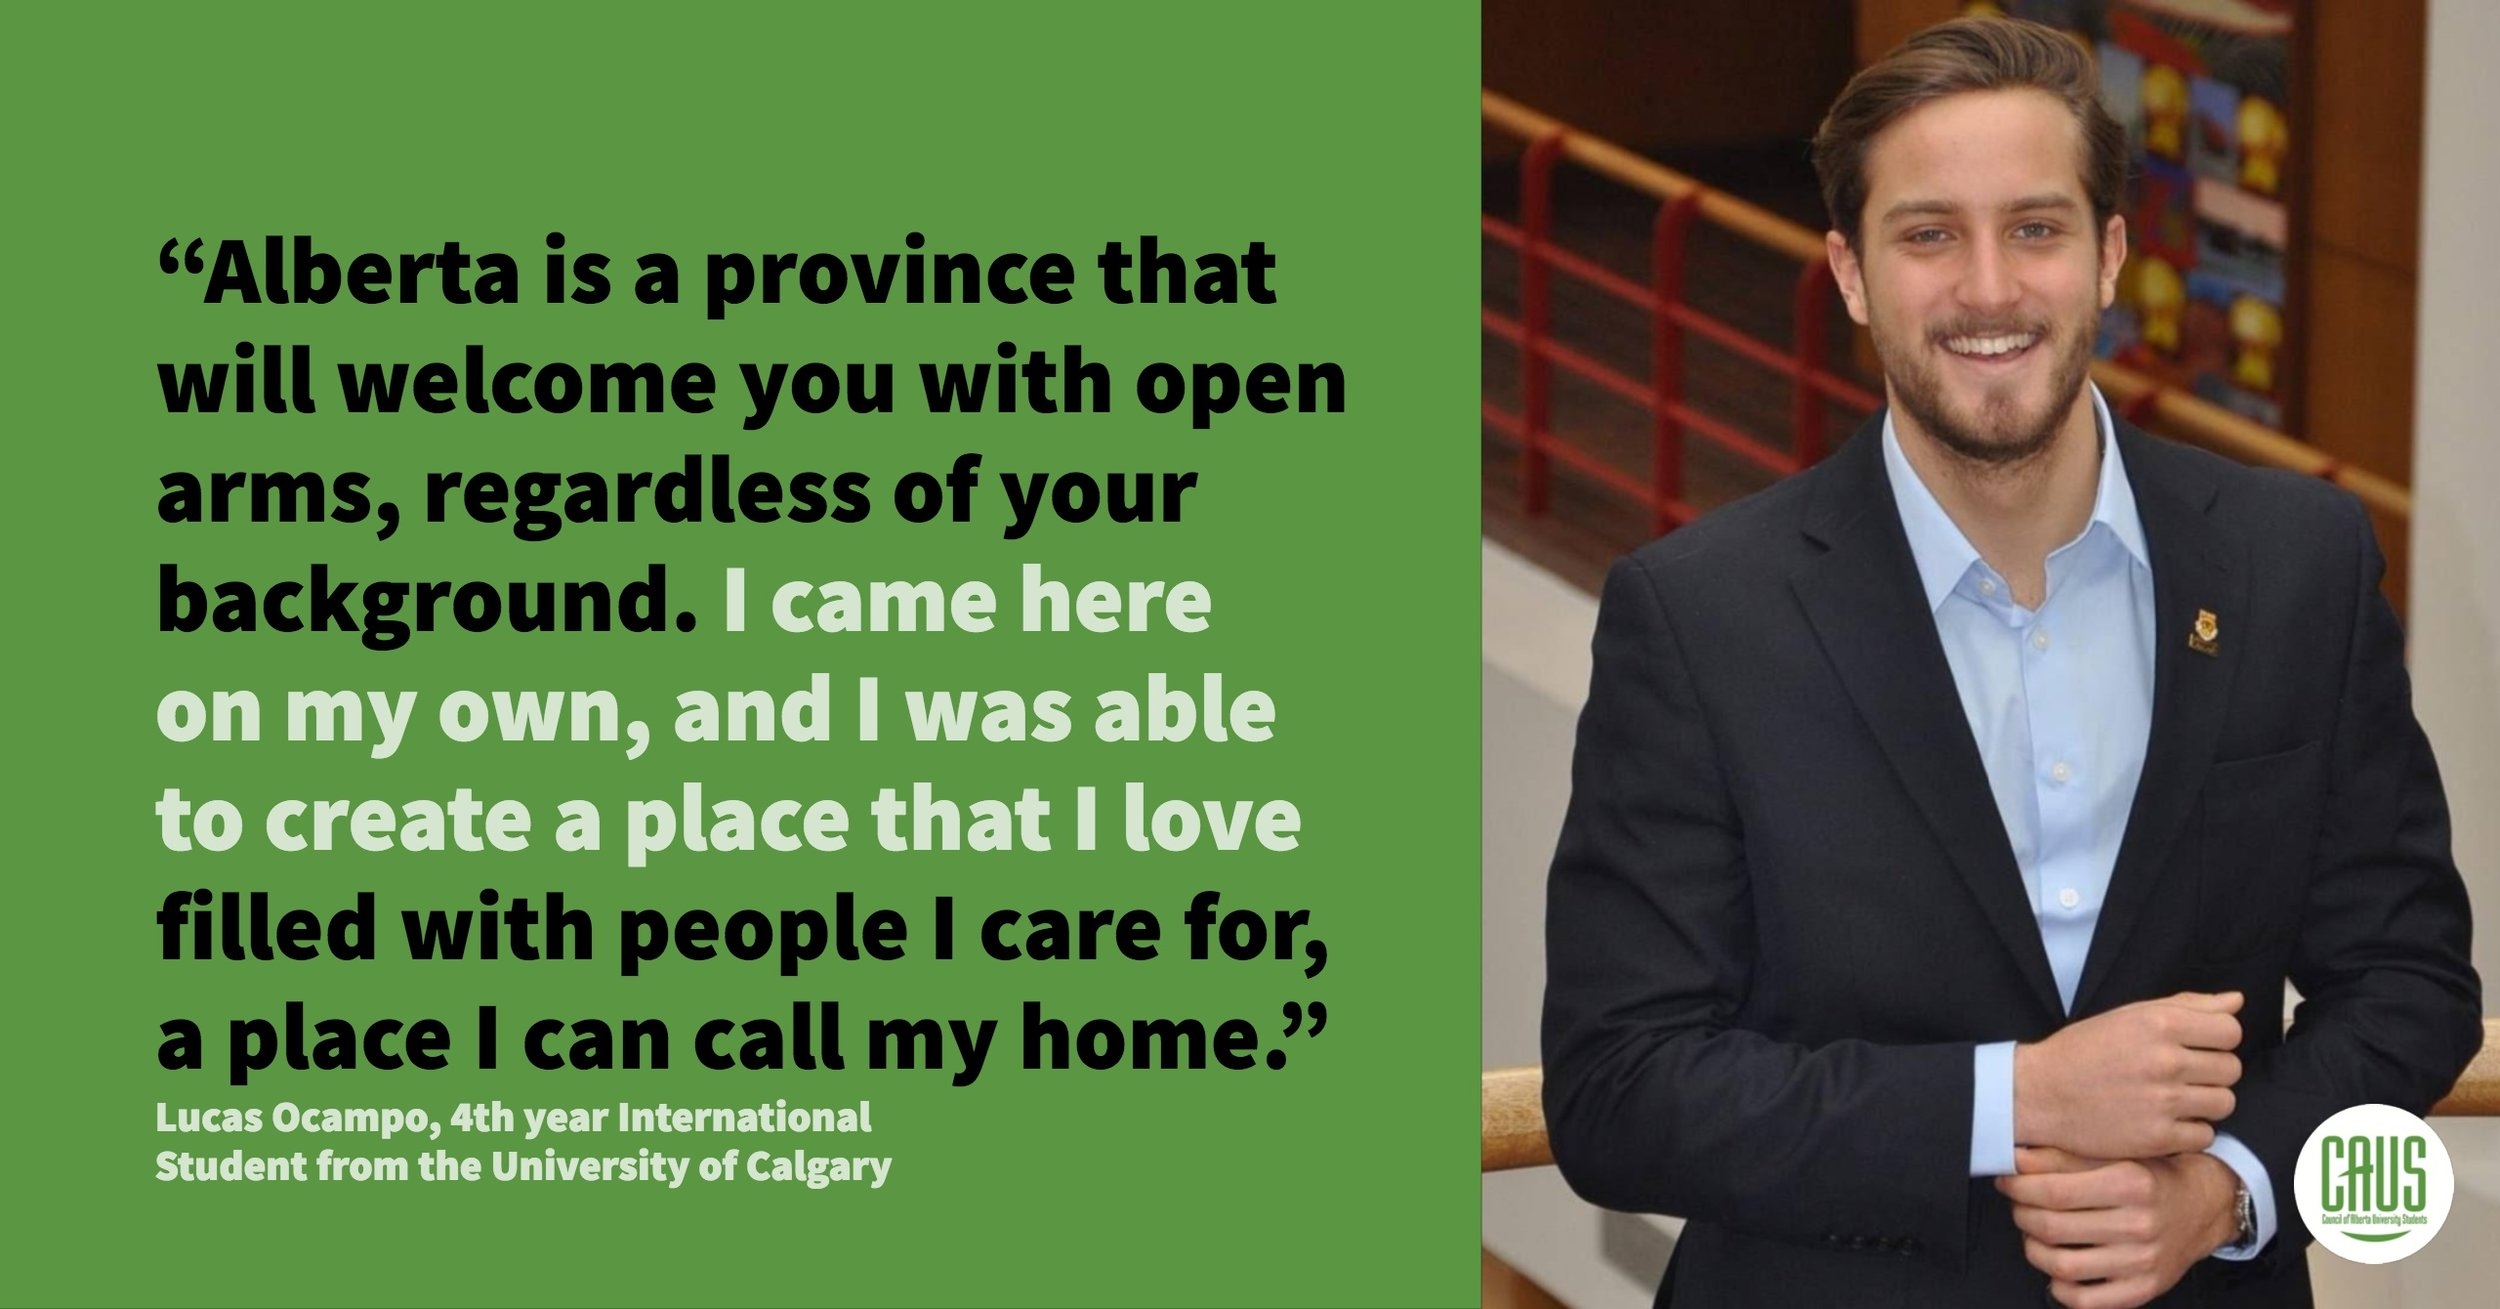  “Alberta is a province that will welcome you with open arms, regardless of your background. I came here on my own, and I was able to create a place that I love filled with people I care for, a place I can call my home. As an international student, i